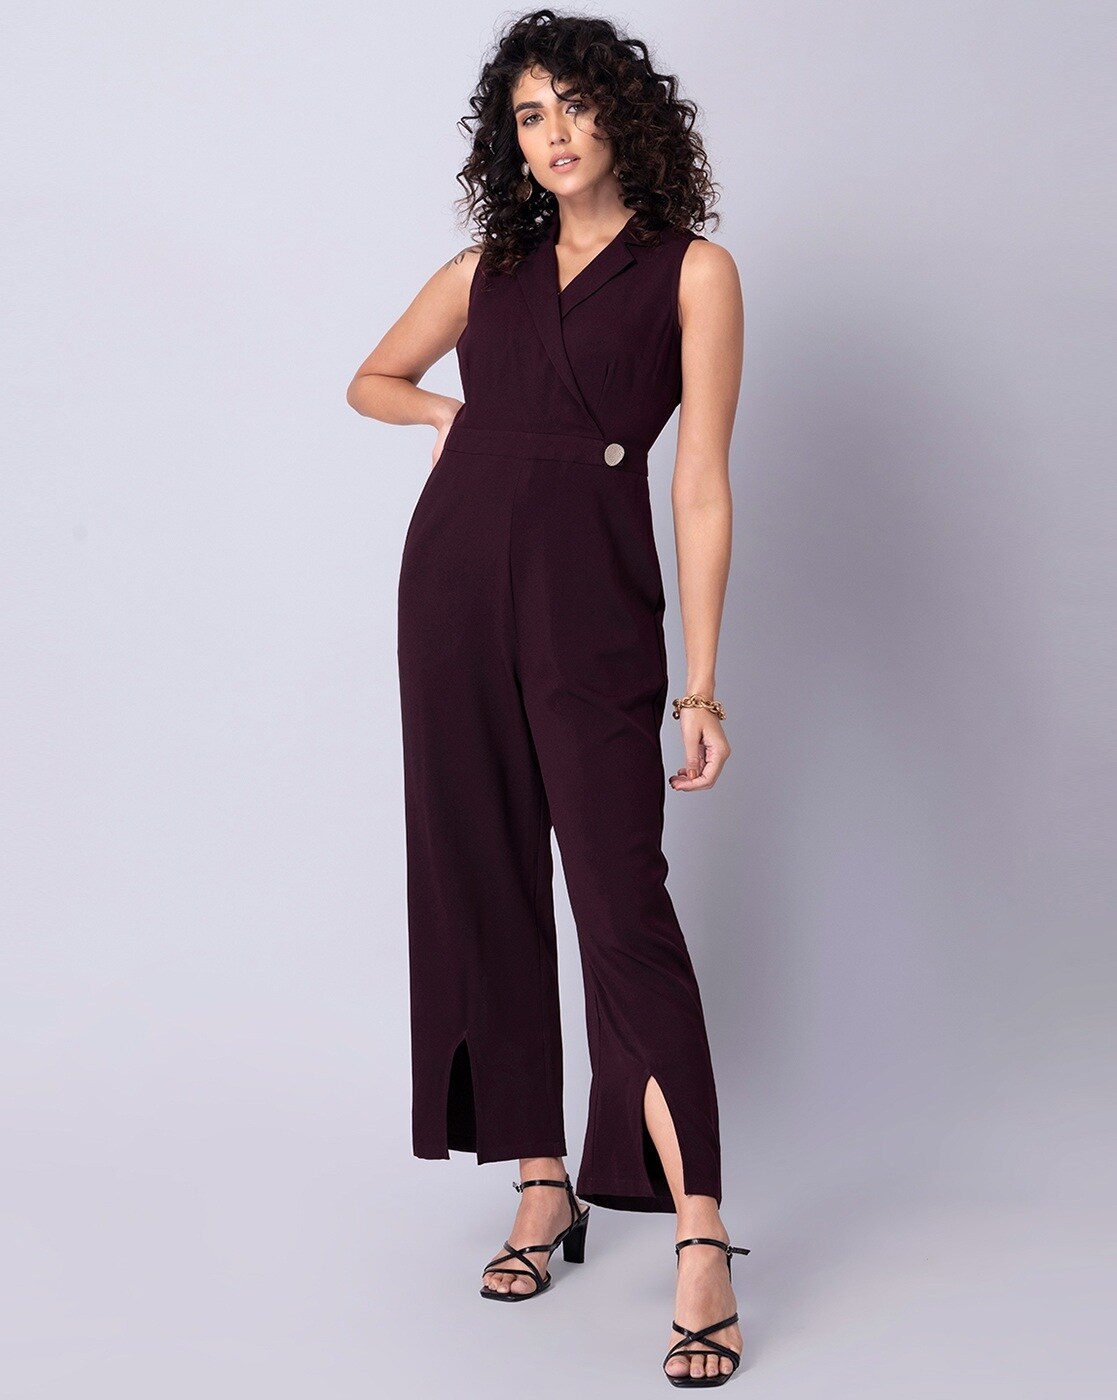 Faballey Black Jumpsuit - Buy Faballey Black Jumpsuit online in India